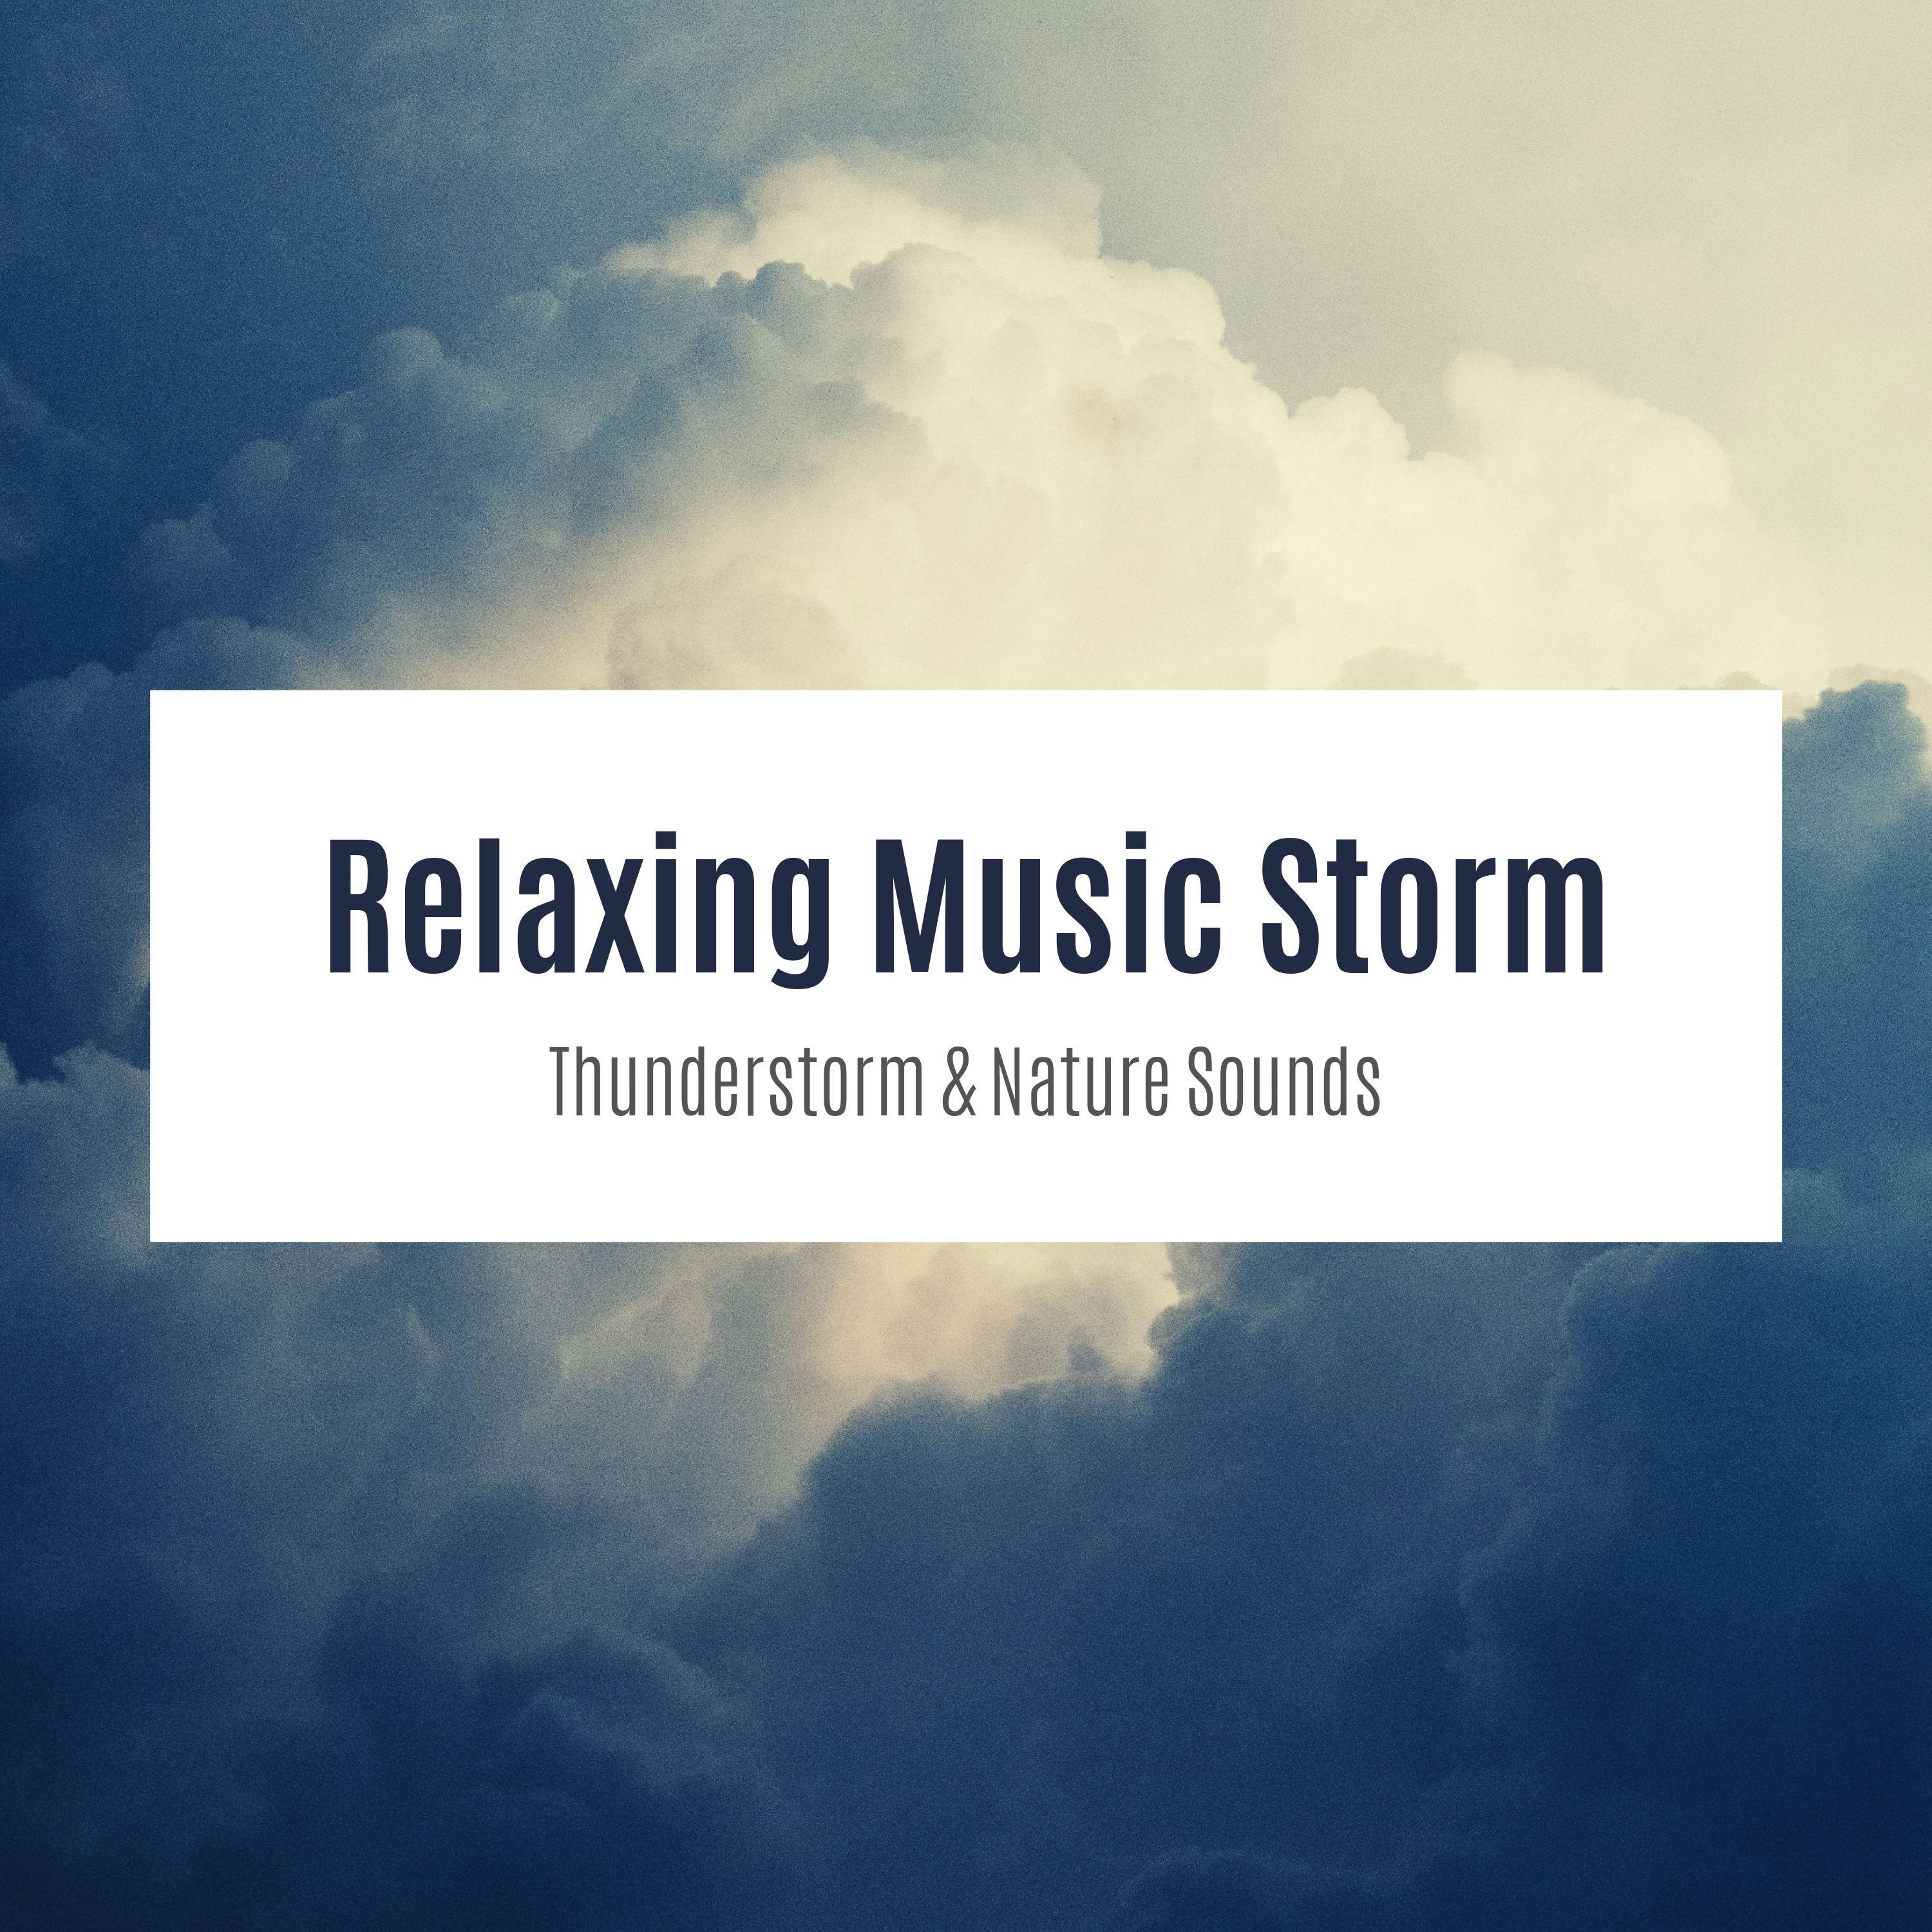 Relaxing Music Storm: Thunderstorm & Nature Sounds